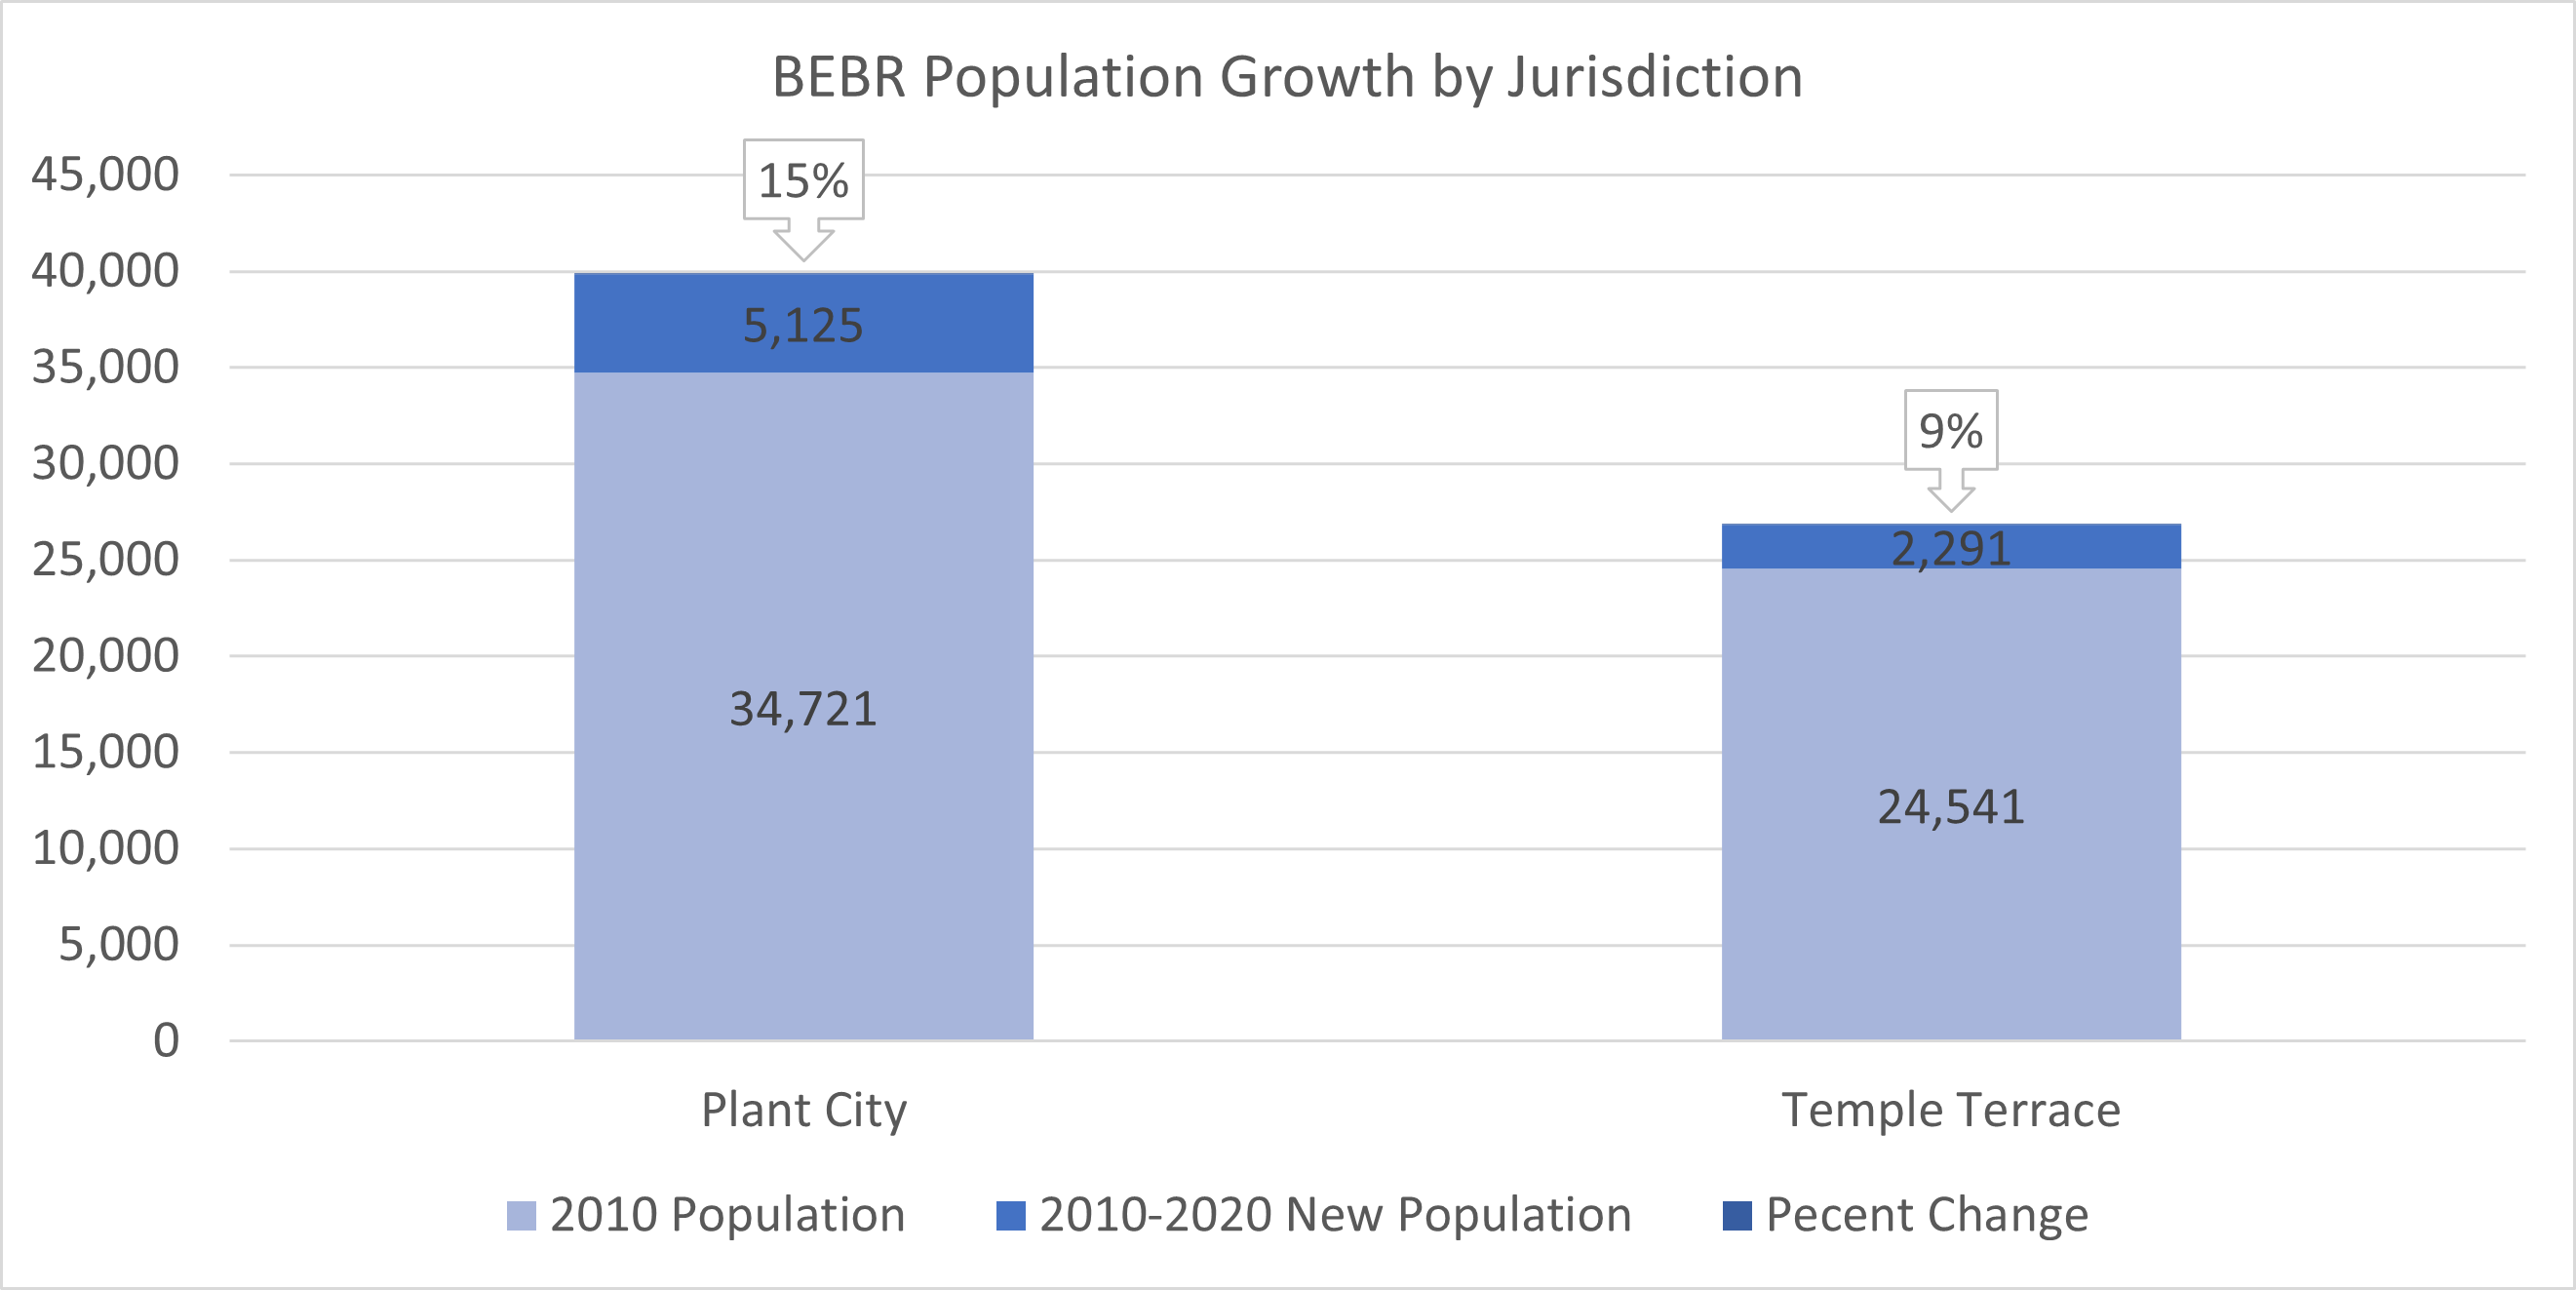 Chart shows 2010-2020 BEBR population growth for Plant City and Temple Terrace.  From 2010 to 2020, Plant City grew 5,125 (15% higher) and Temple Terrace grew 2,291 (9%).